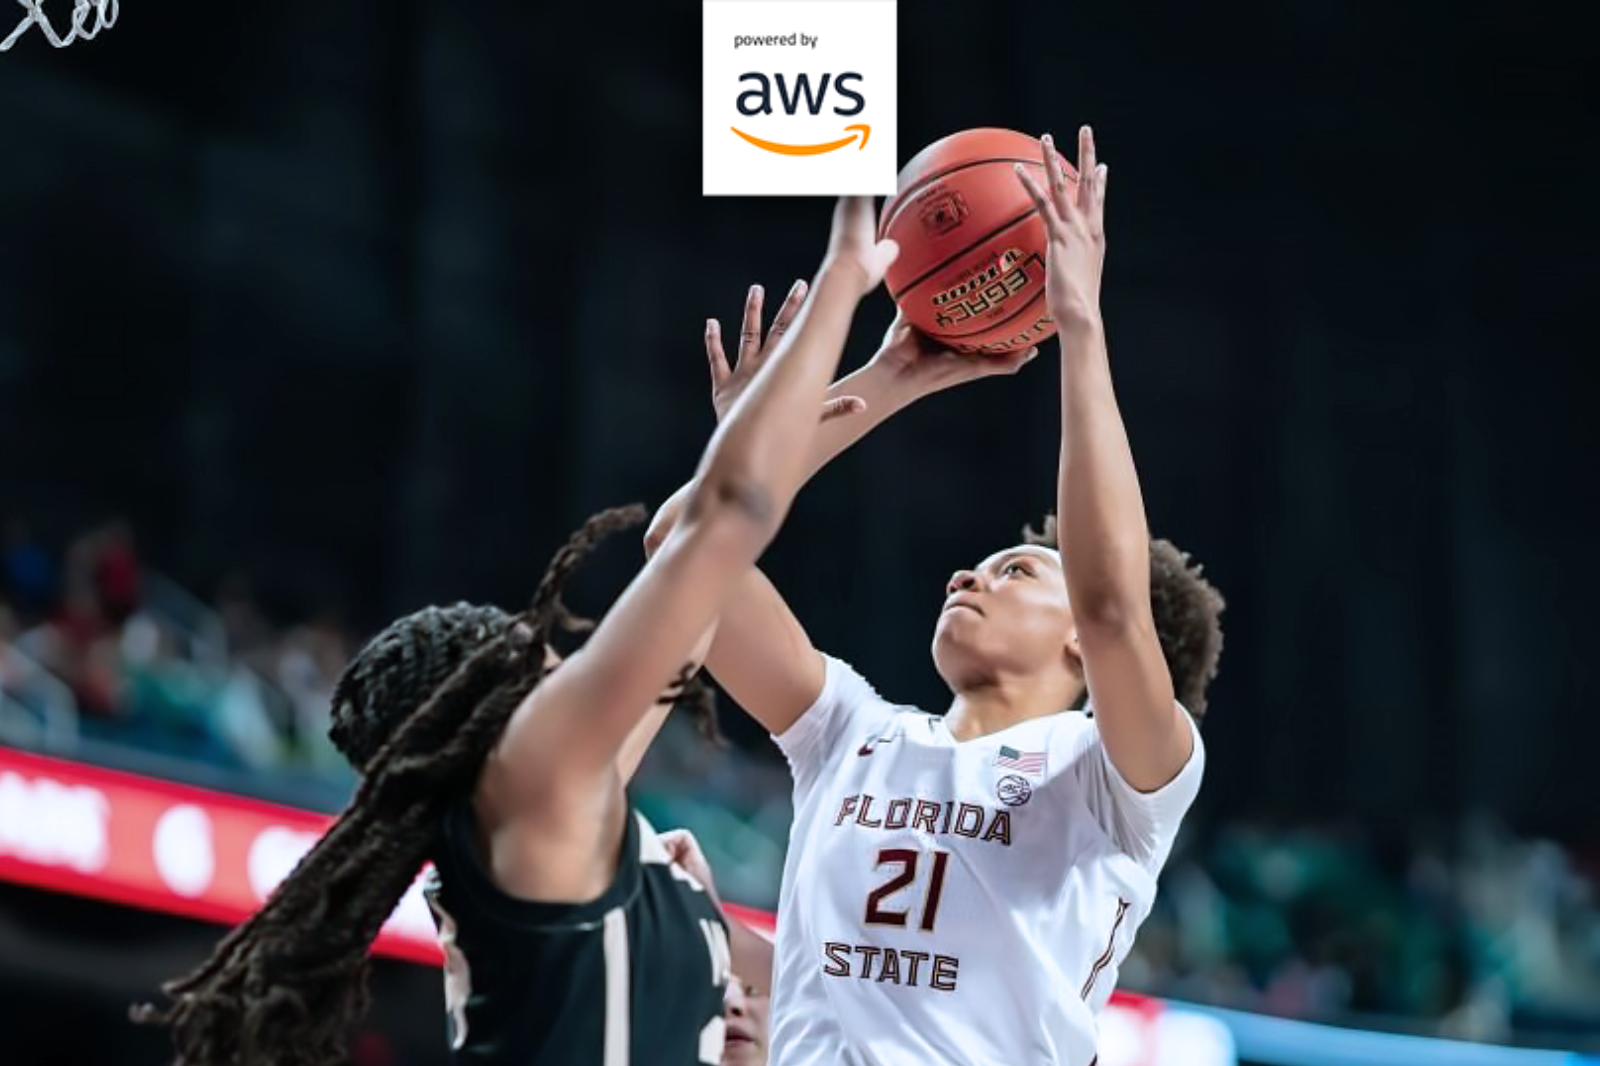 Florida State Basketball (women's) is partnering with sports analytics company KINEXON for player tracking and data.